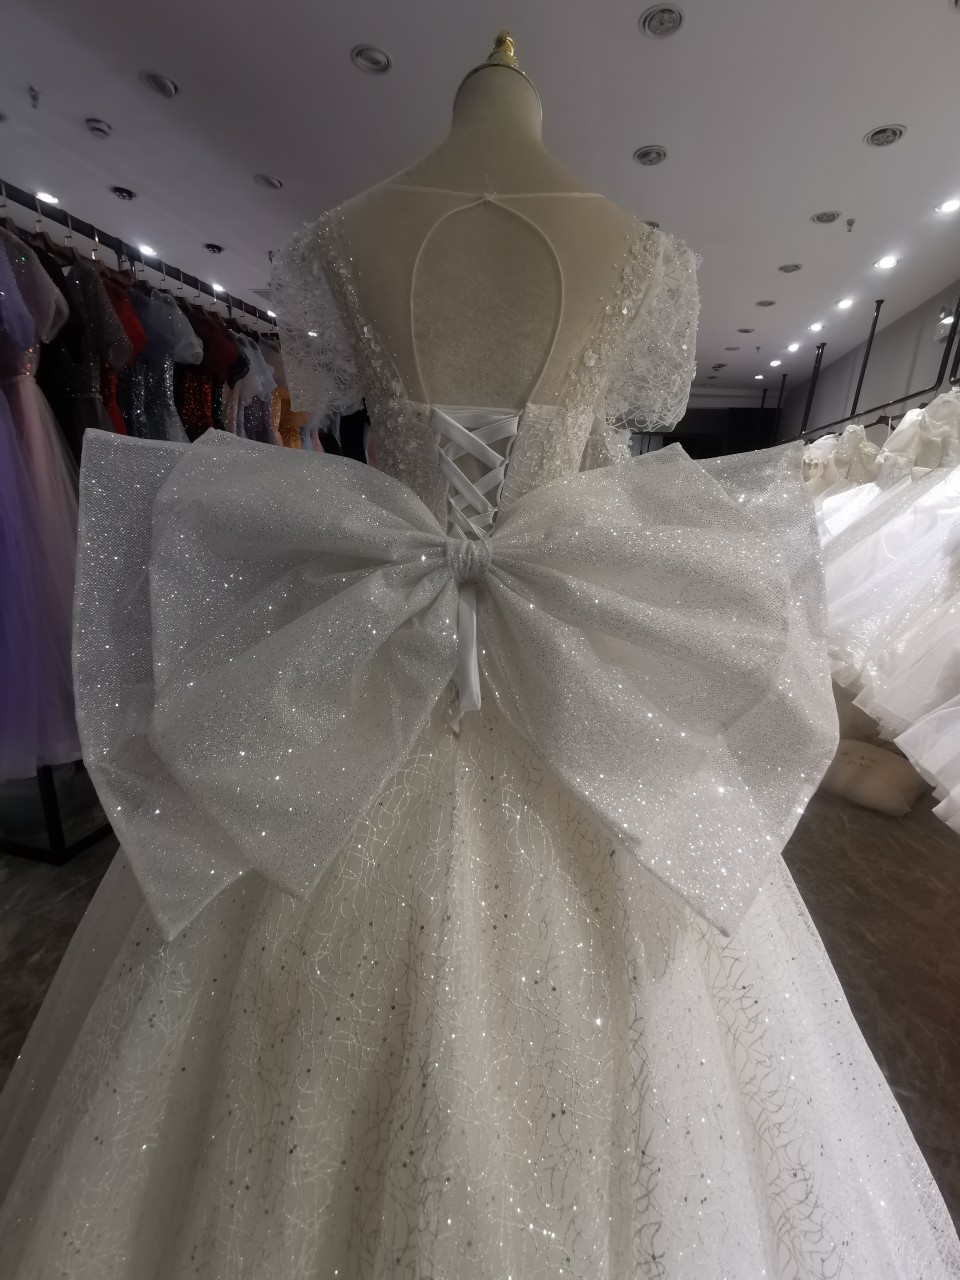 Super large 80cm double layer bow wedding dress with a covered back design and gold glitter powder accessories.